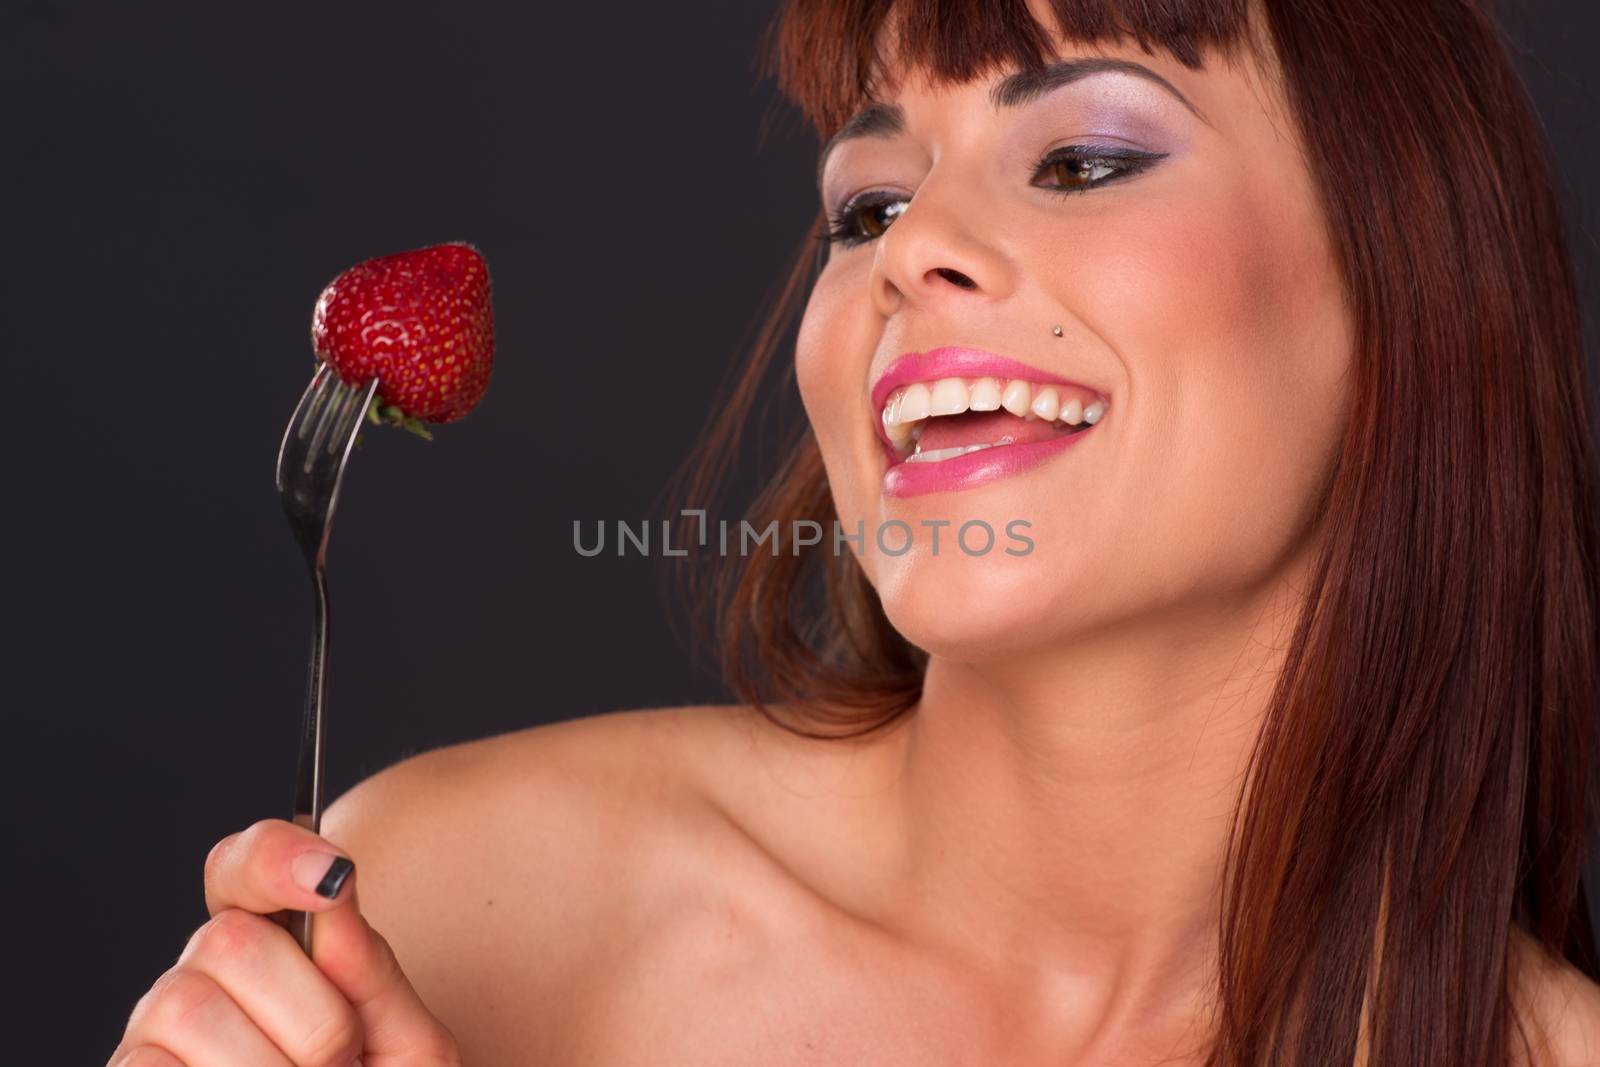 Woman holds a fork loaded with fresh fruit strawberry